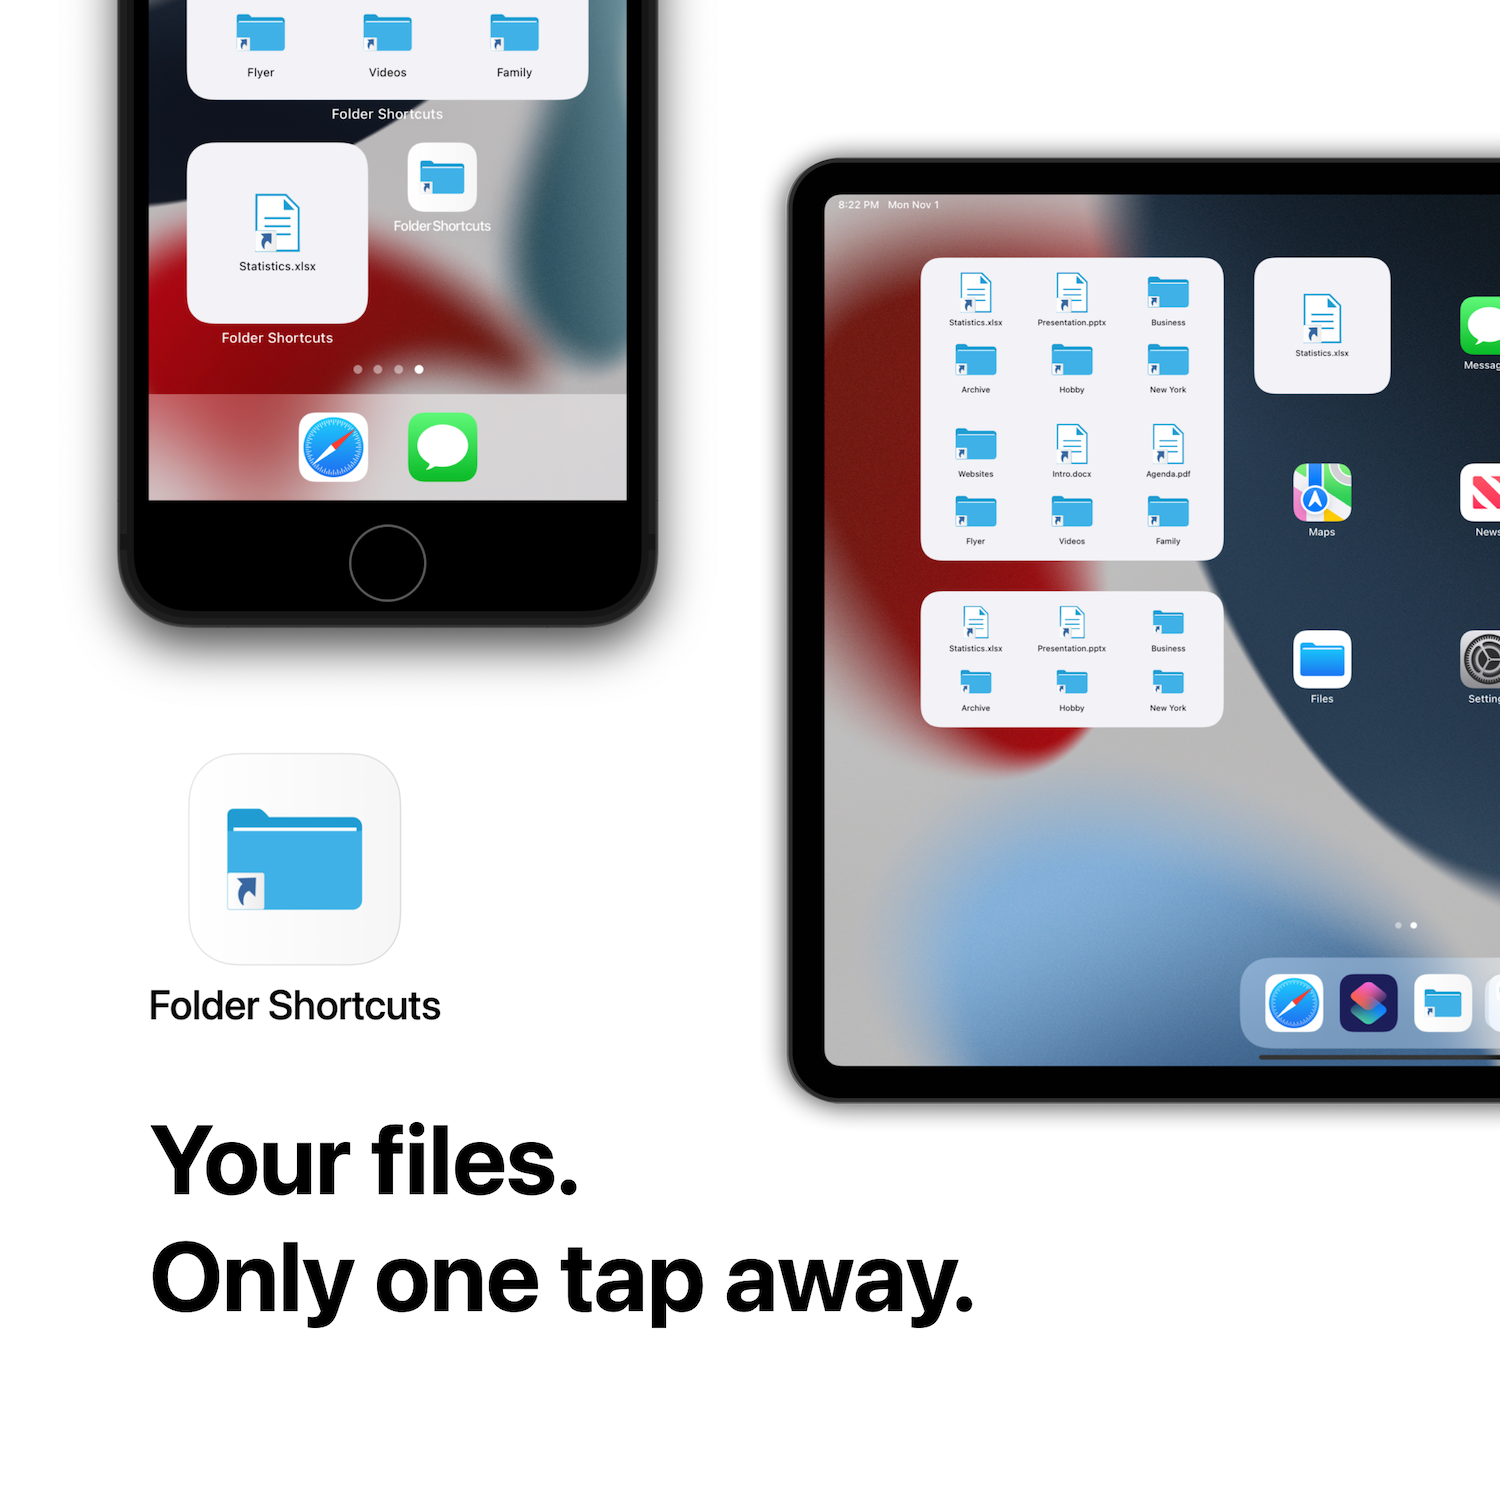 Folder Shortcuts @ Homescreen – Files and Folders at the iOS home screen